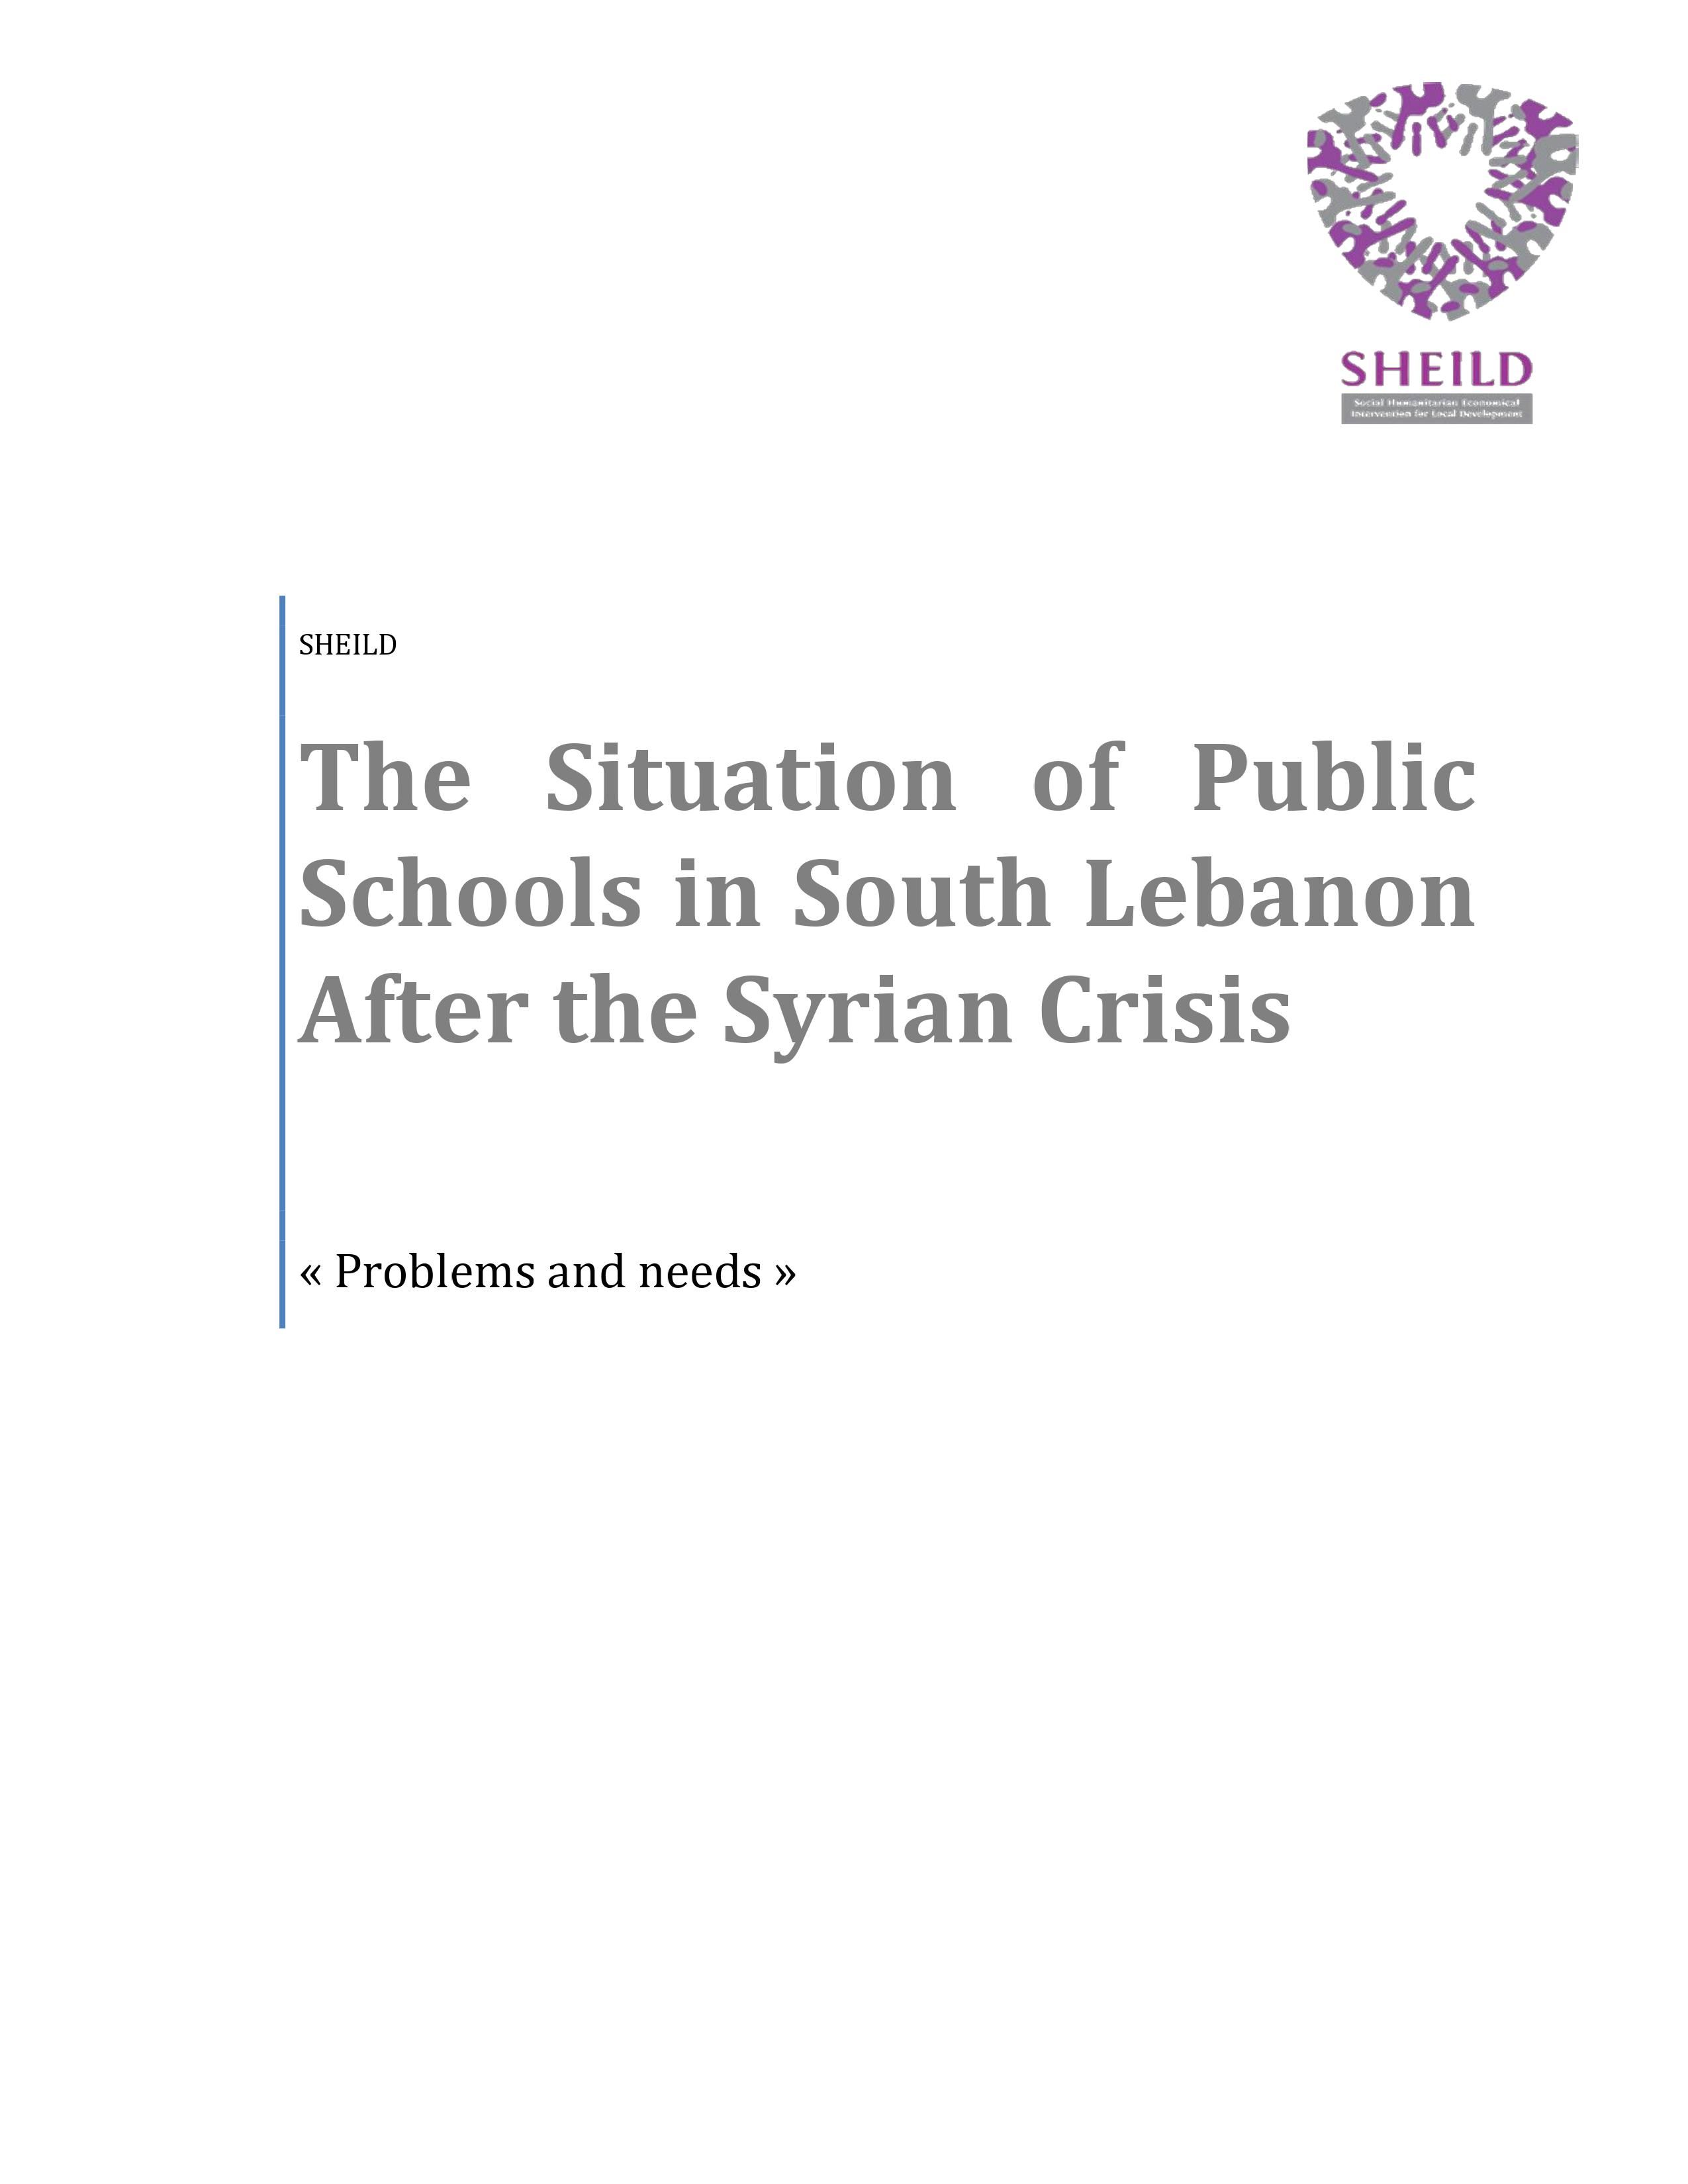 The Situation Of Public Schools In South Lebanon After The Syrian Crisis- Problems And Needs